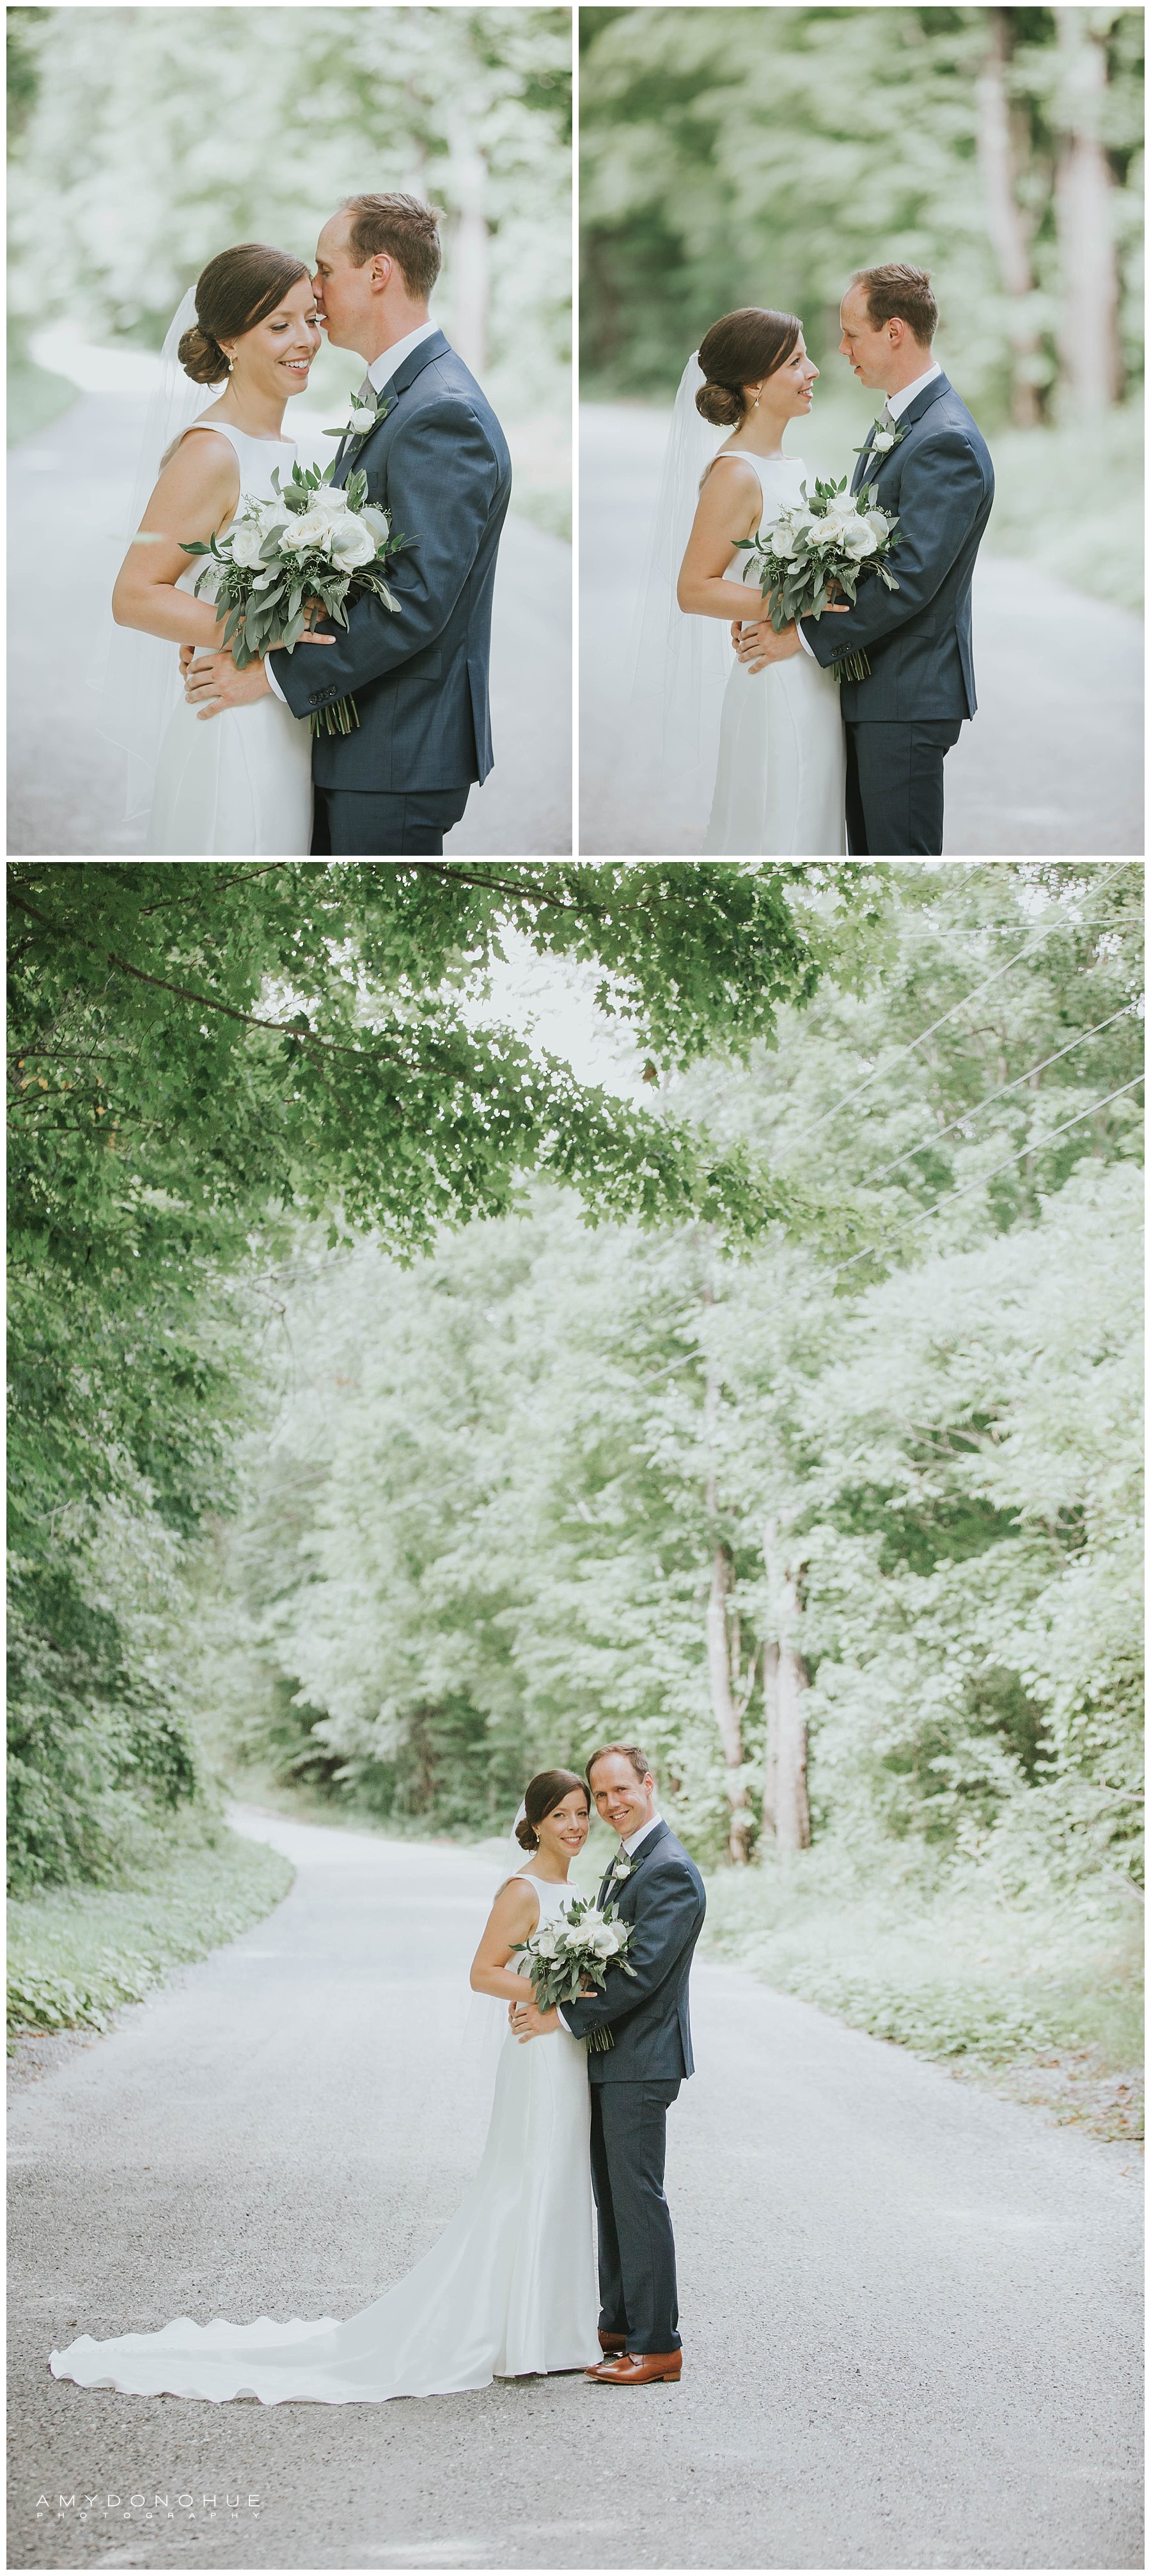 Bride and Groom Portraits | © Amy Donohue Photography | Manchester Vermont Wedding Photographer